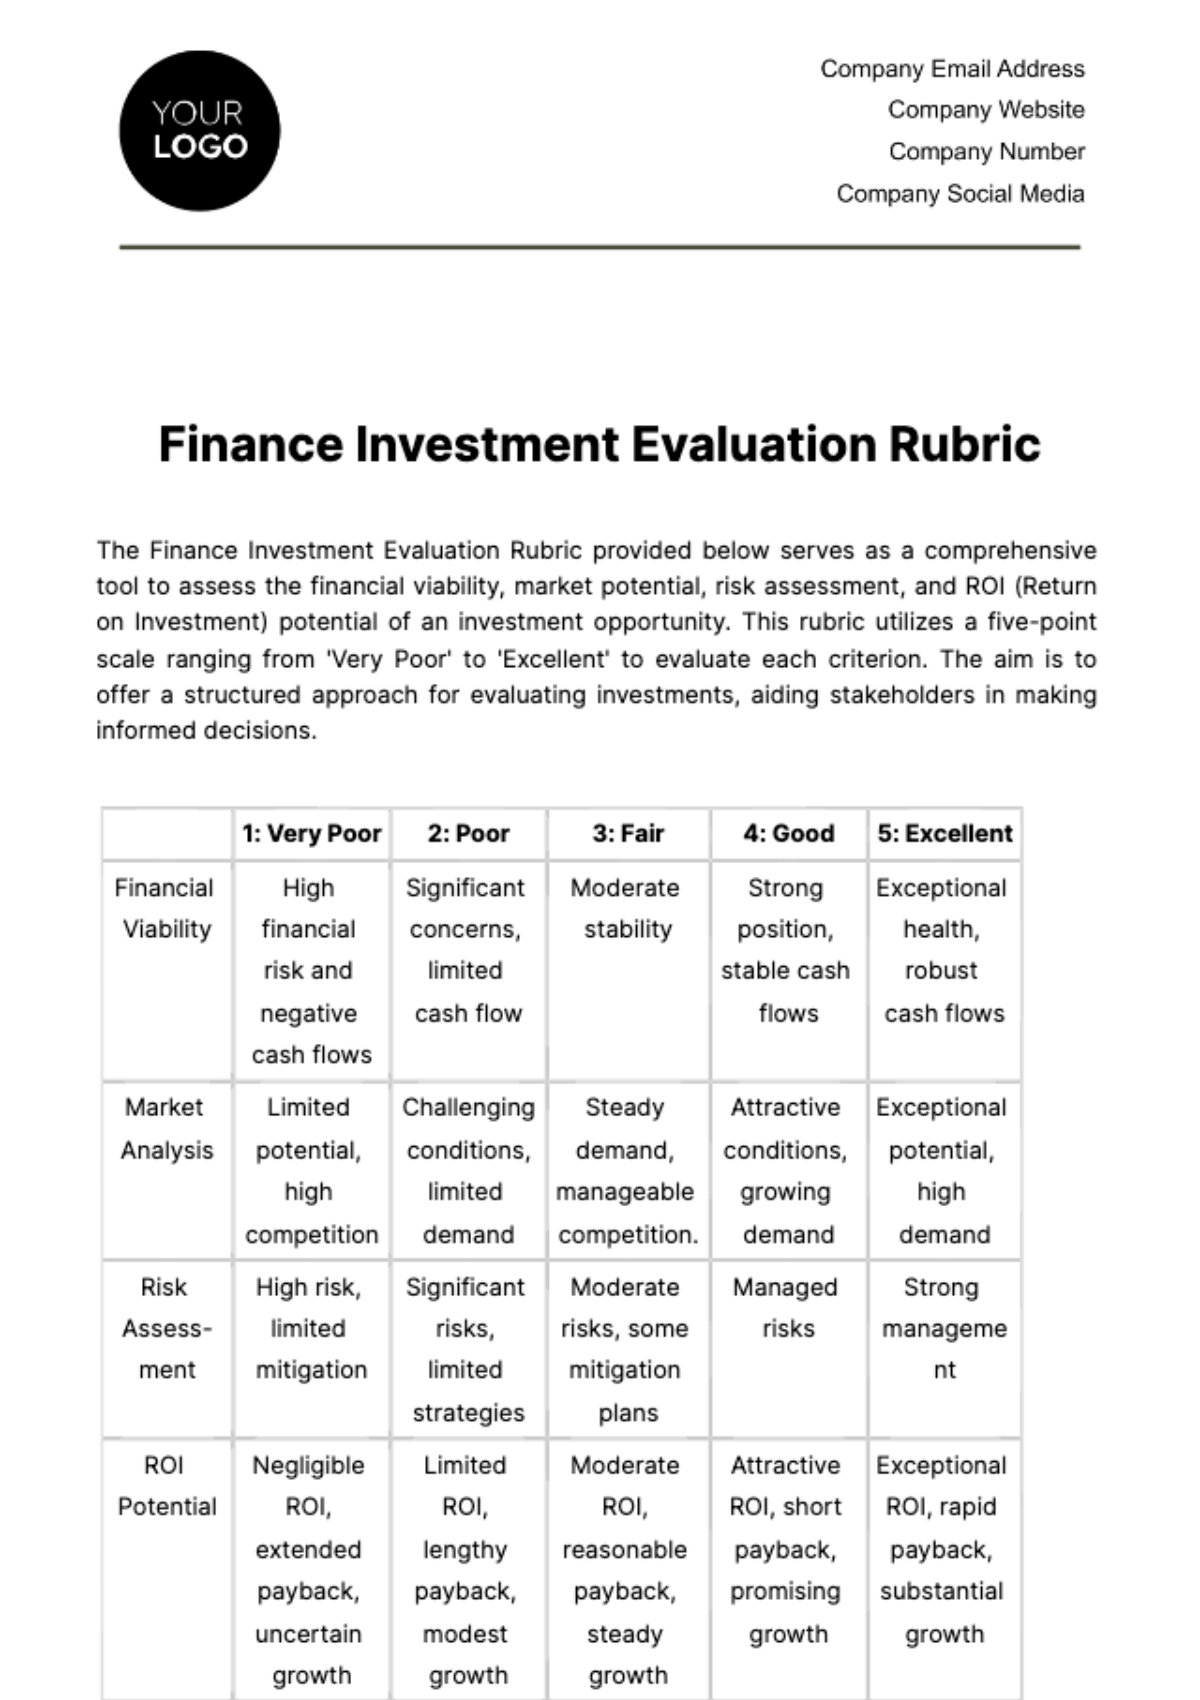 Free Finance Investment Evaluation Rubric Template